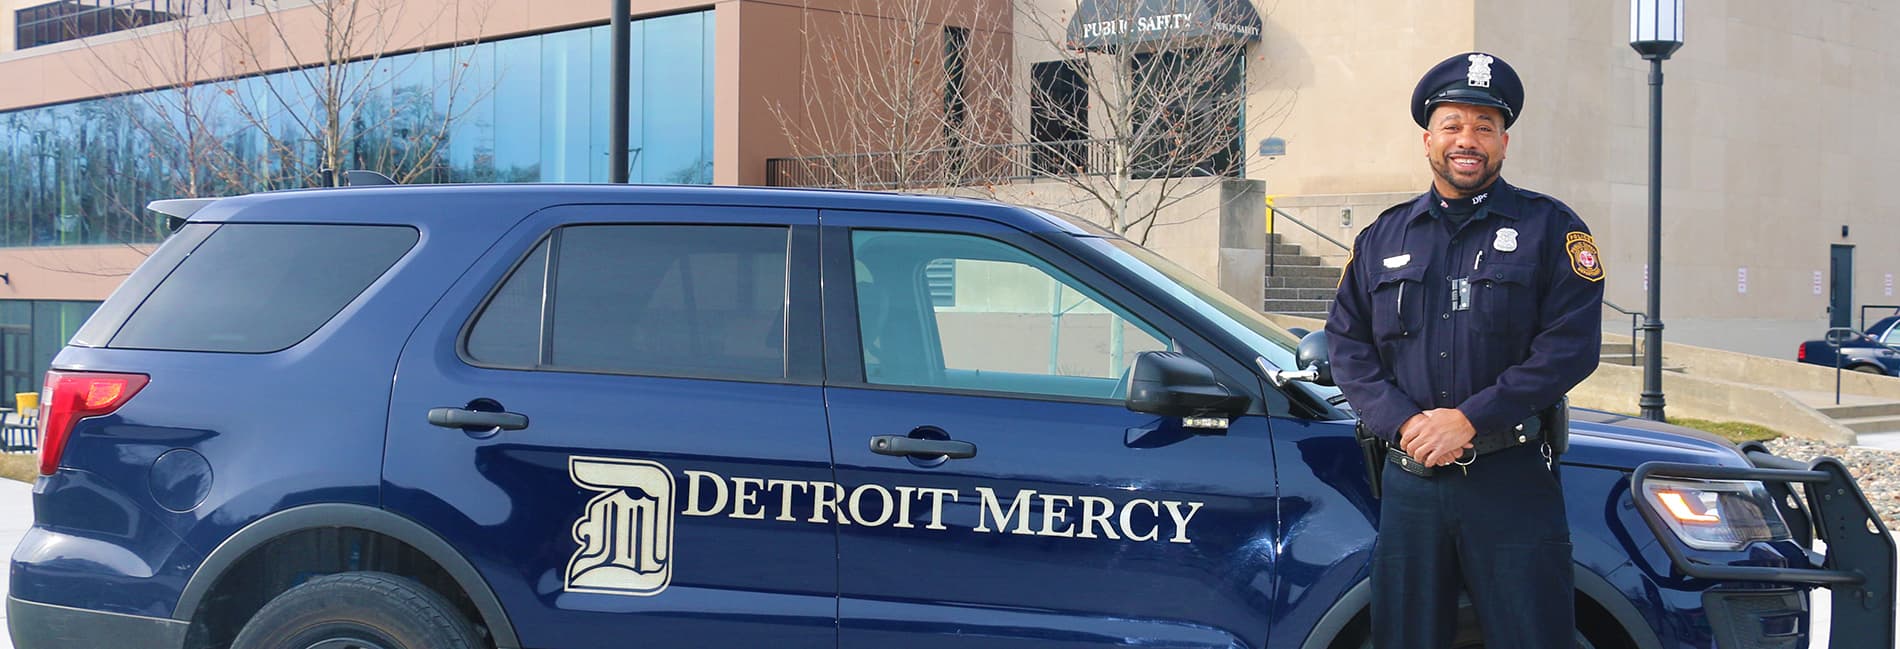 detroit mercy public safety officer by his vehicle